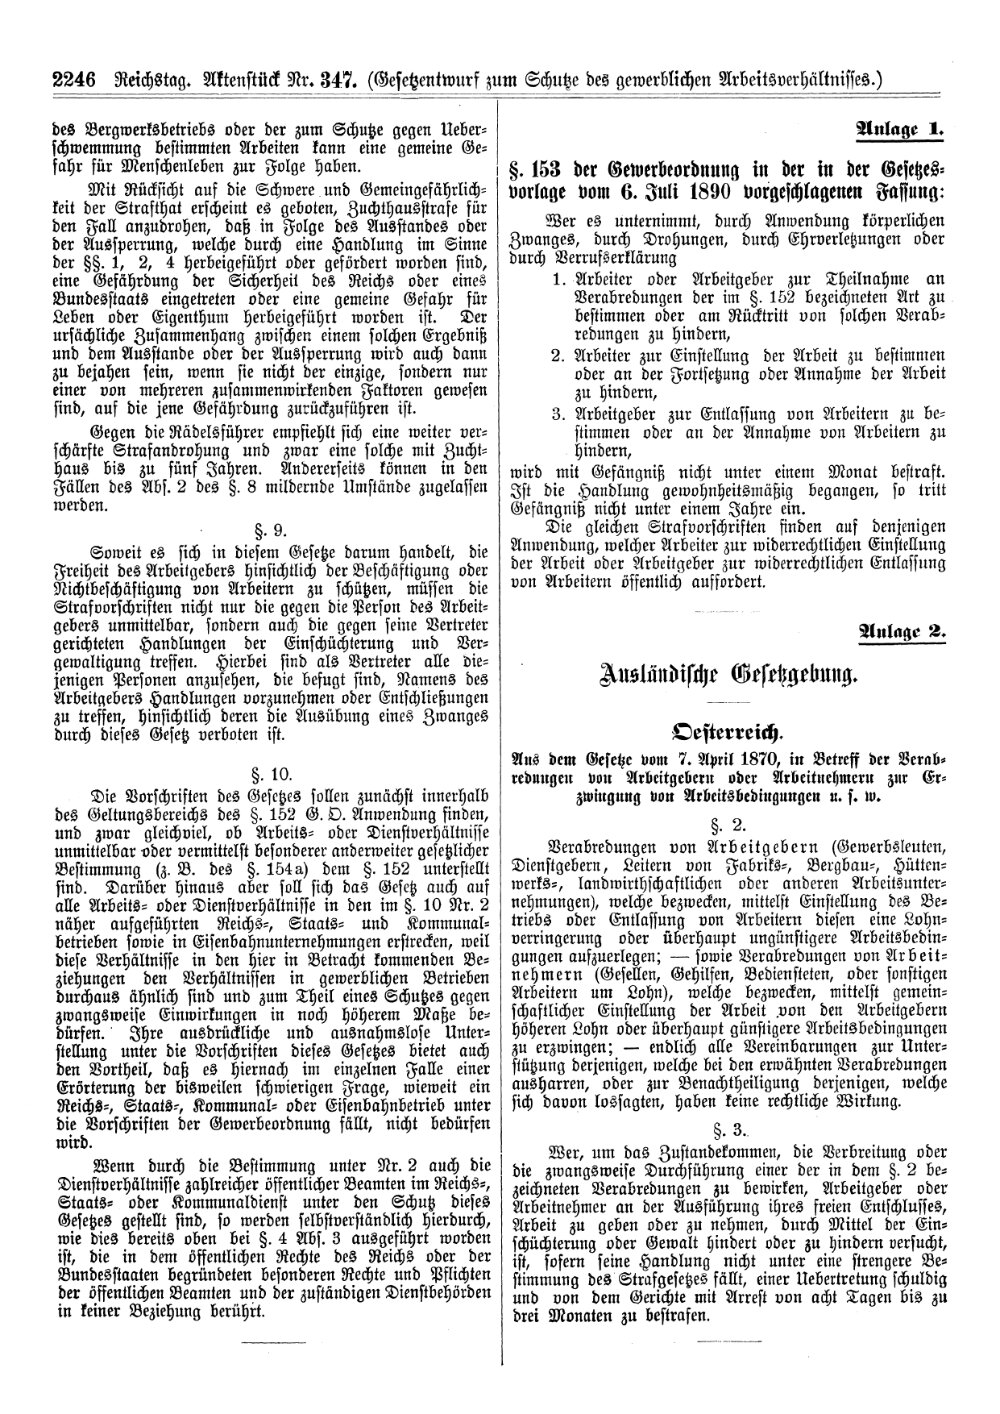 Scan of page 2246